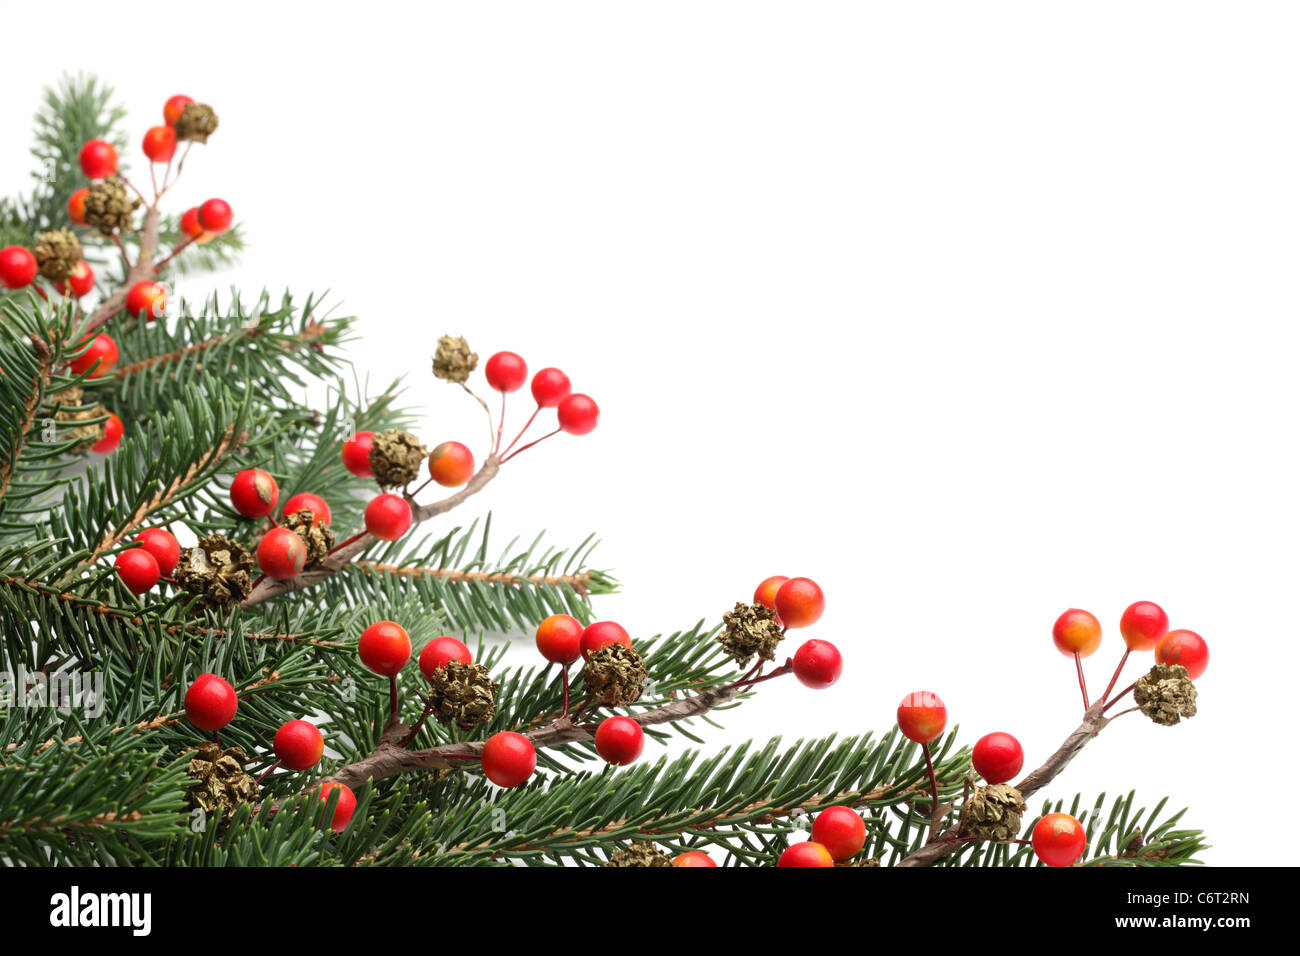 Pine branches and berries for Christmas border. Stock Photo